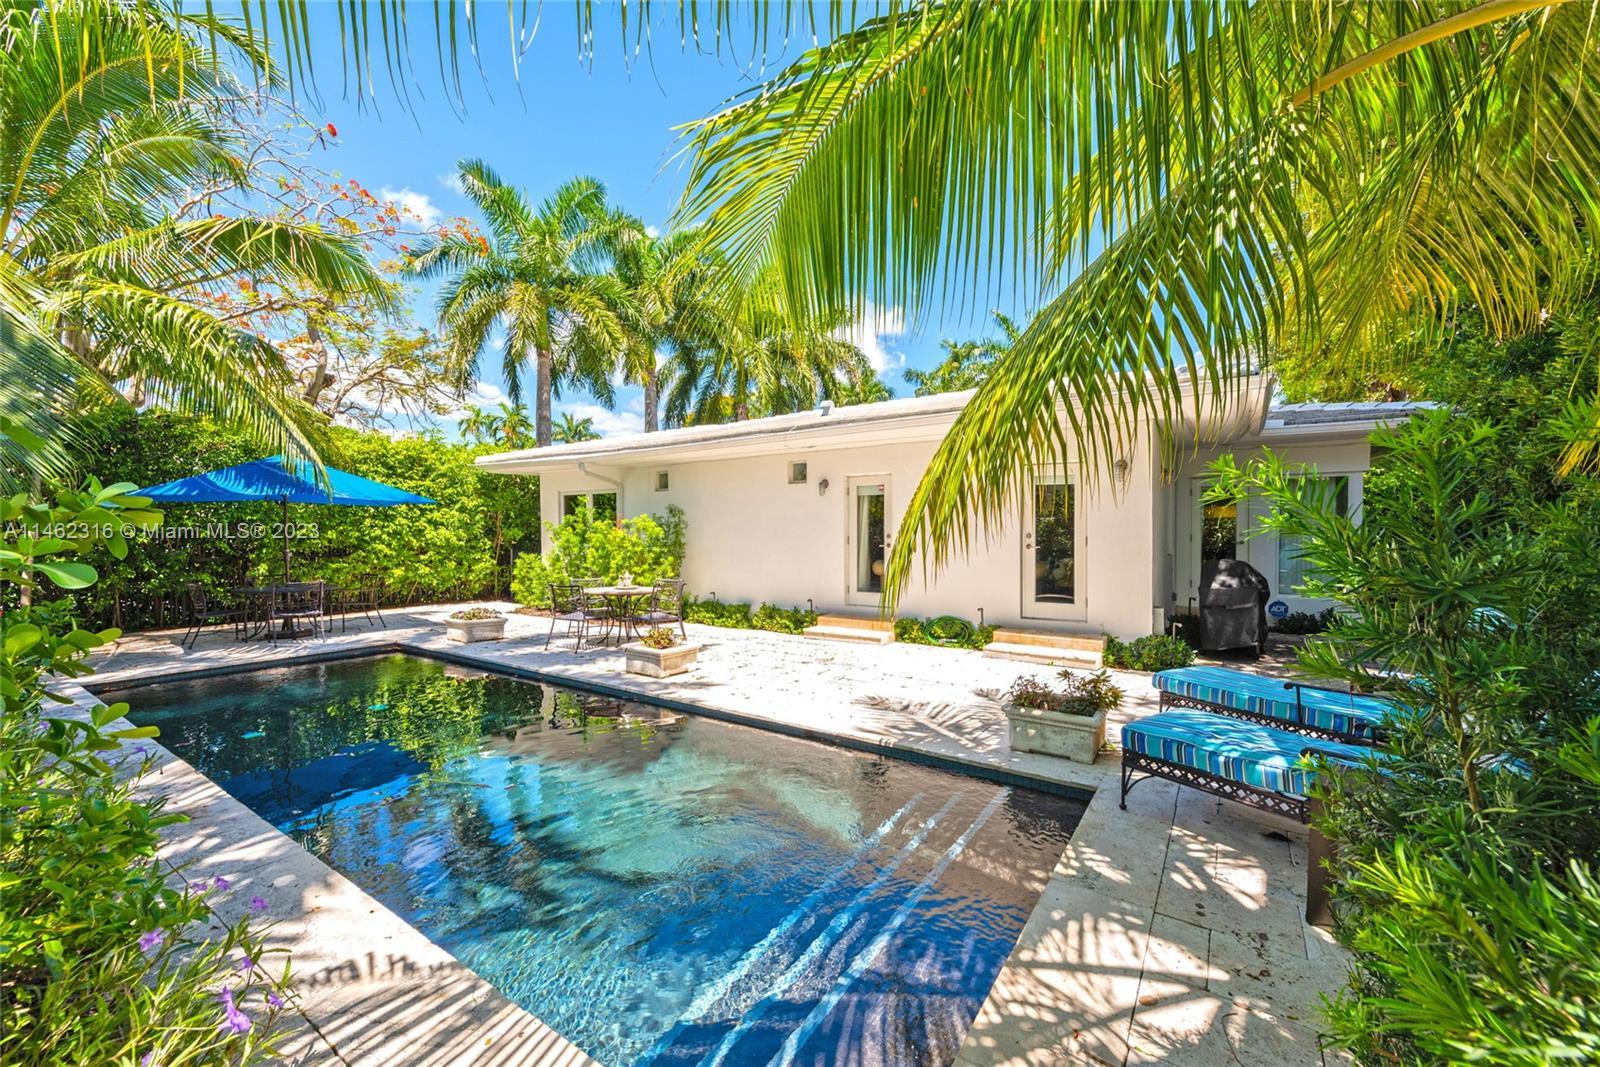 Paradise! Updated pool home tucked behind a lush privacy hedge on prestigious upper N Bay Rd. The ga